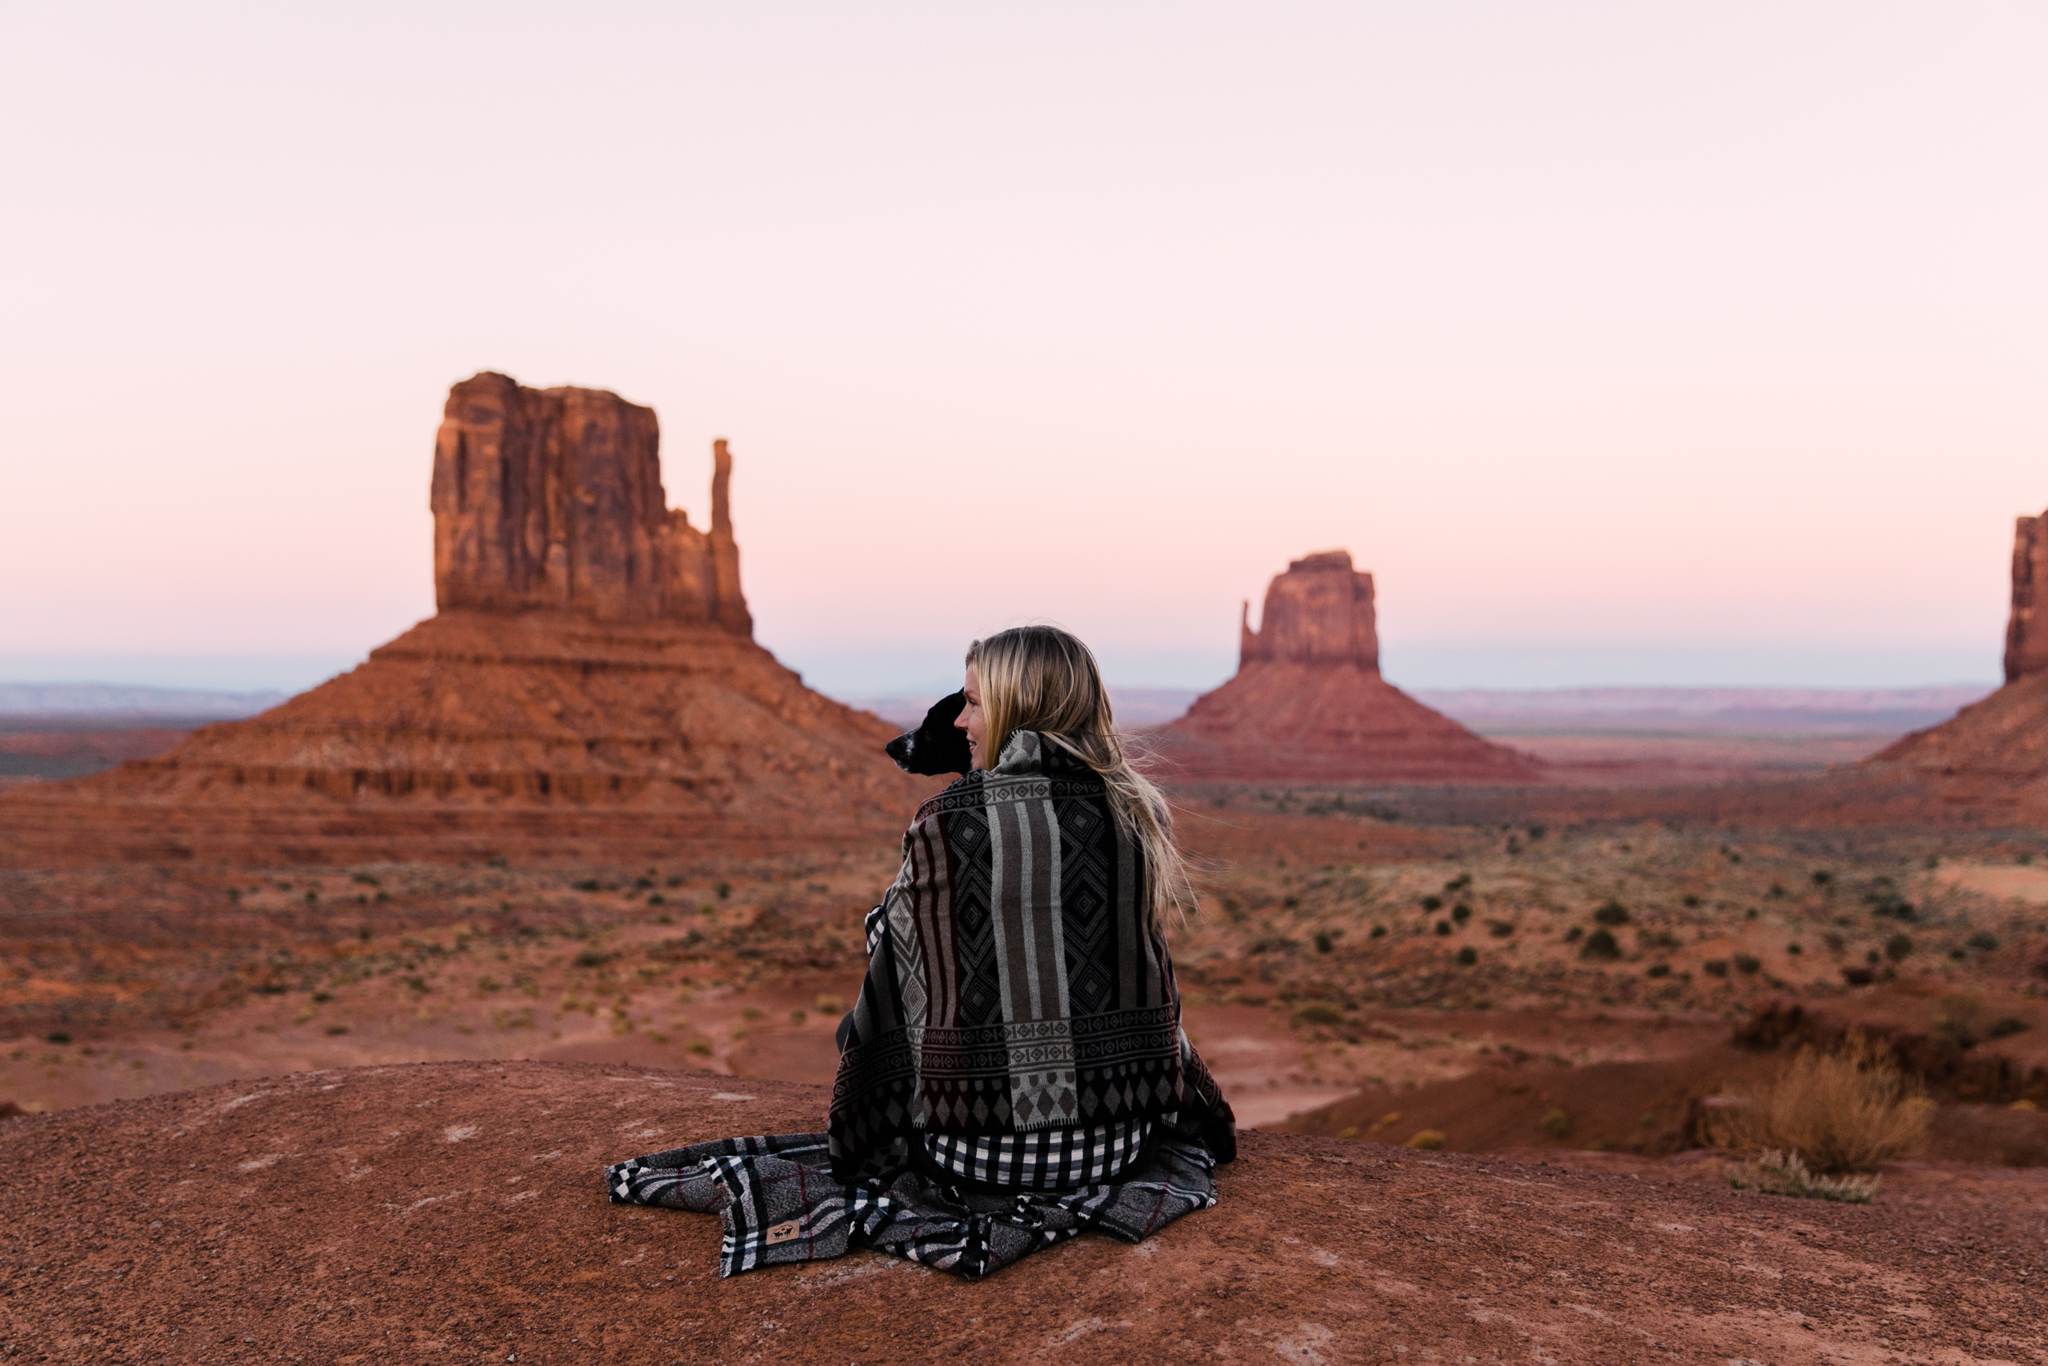 monument valley camping | utah and california adventure elopement photographers | the hearnes adventure photography | www.thehearnes.com